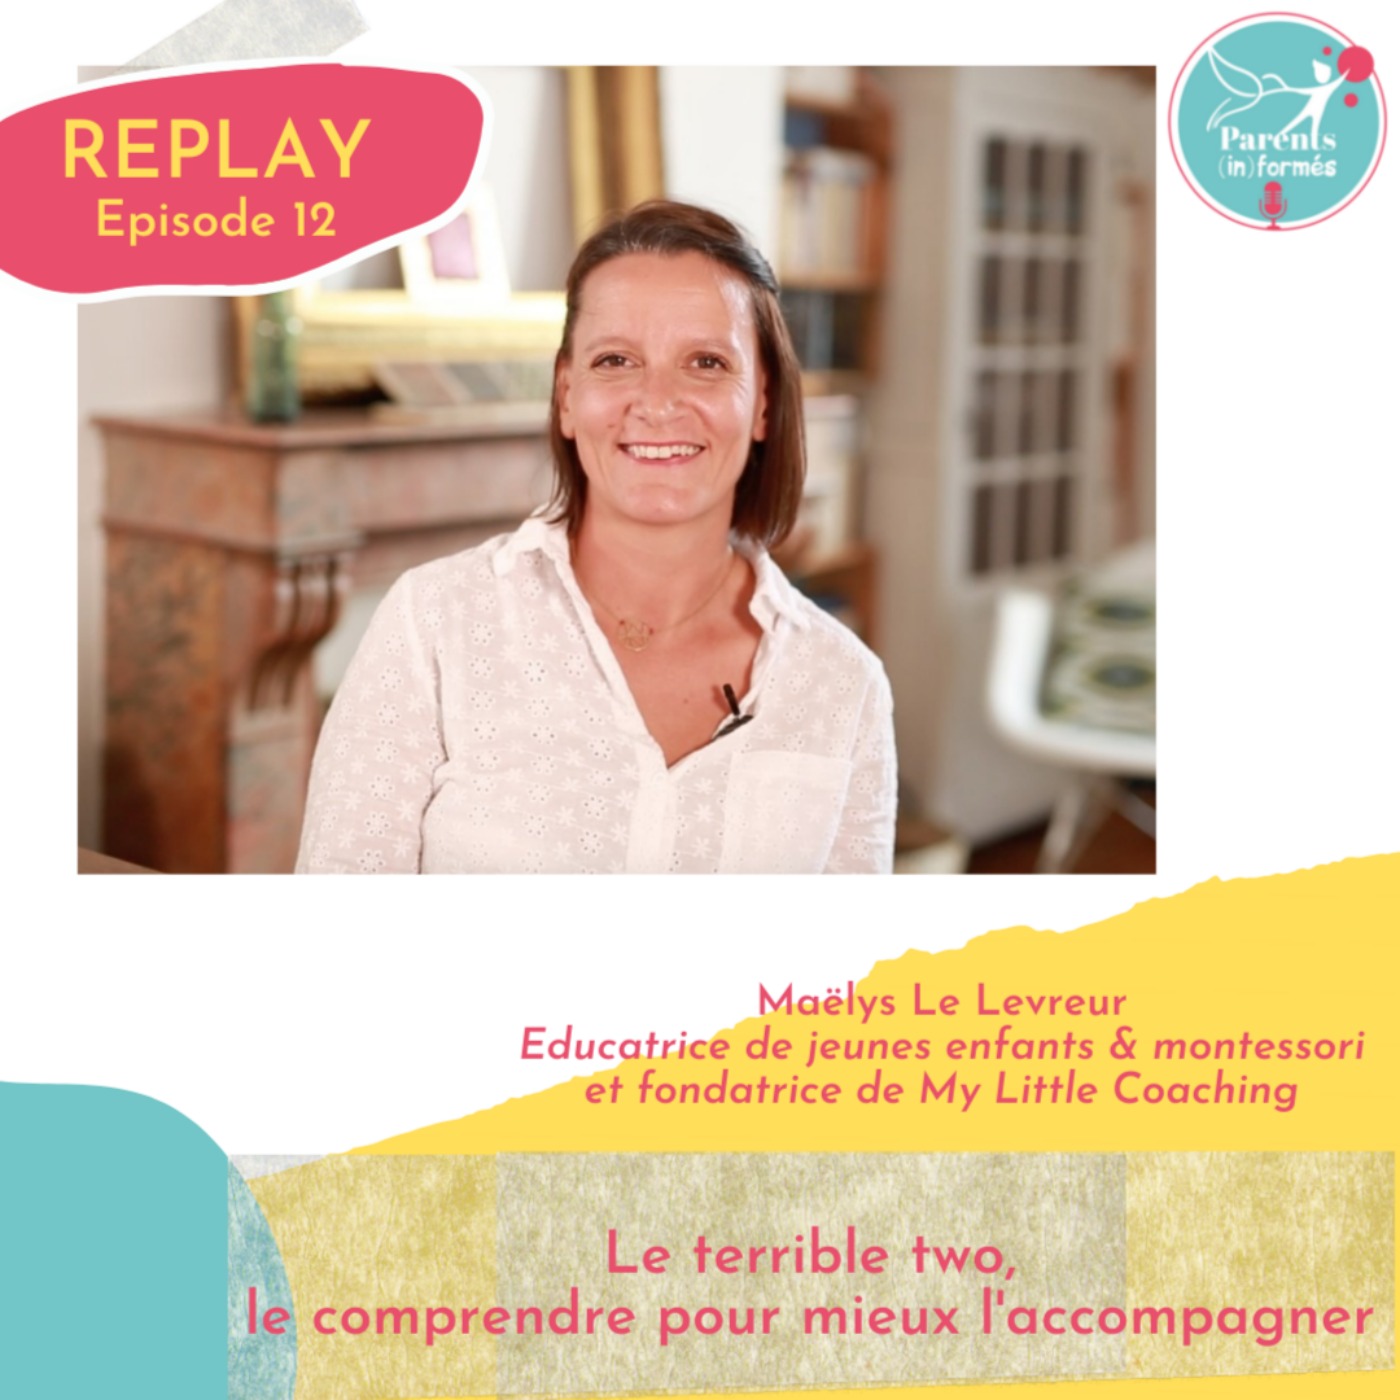 Replay - Le terrible two, le comprendre pour mieux l'accompagner